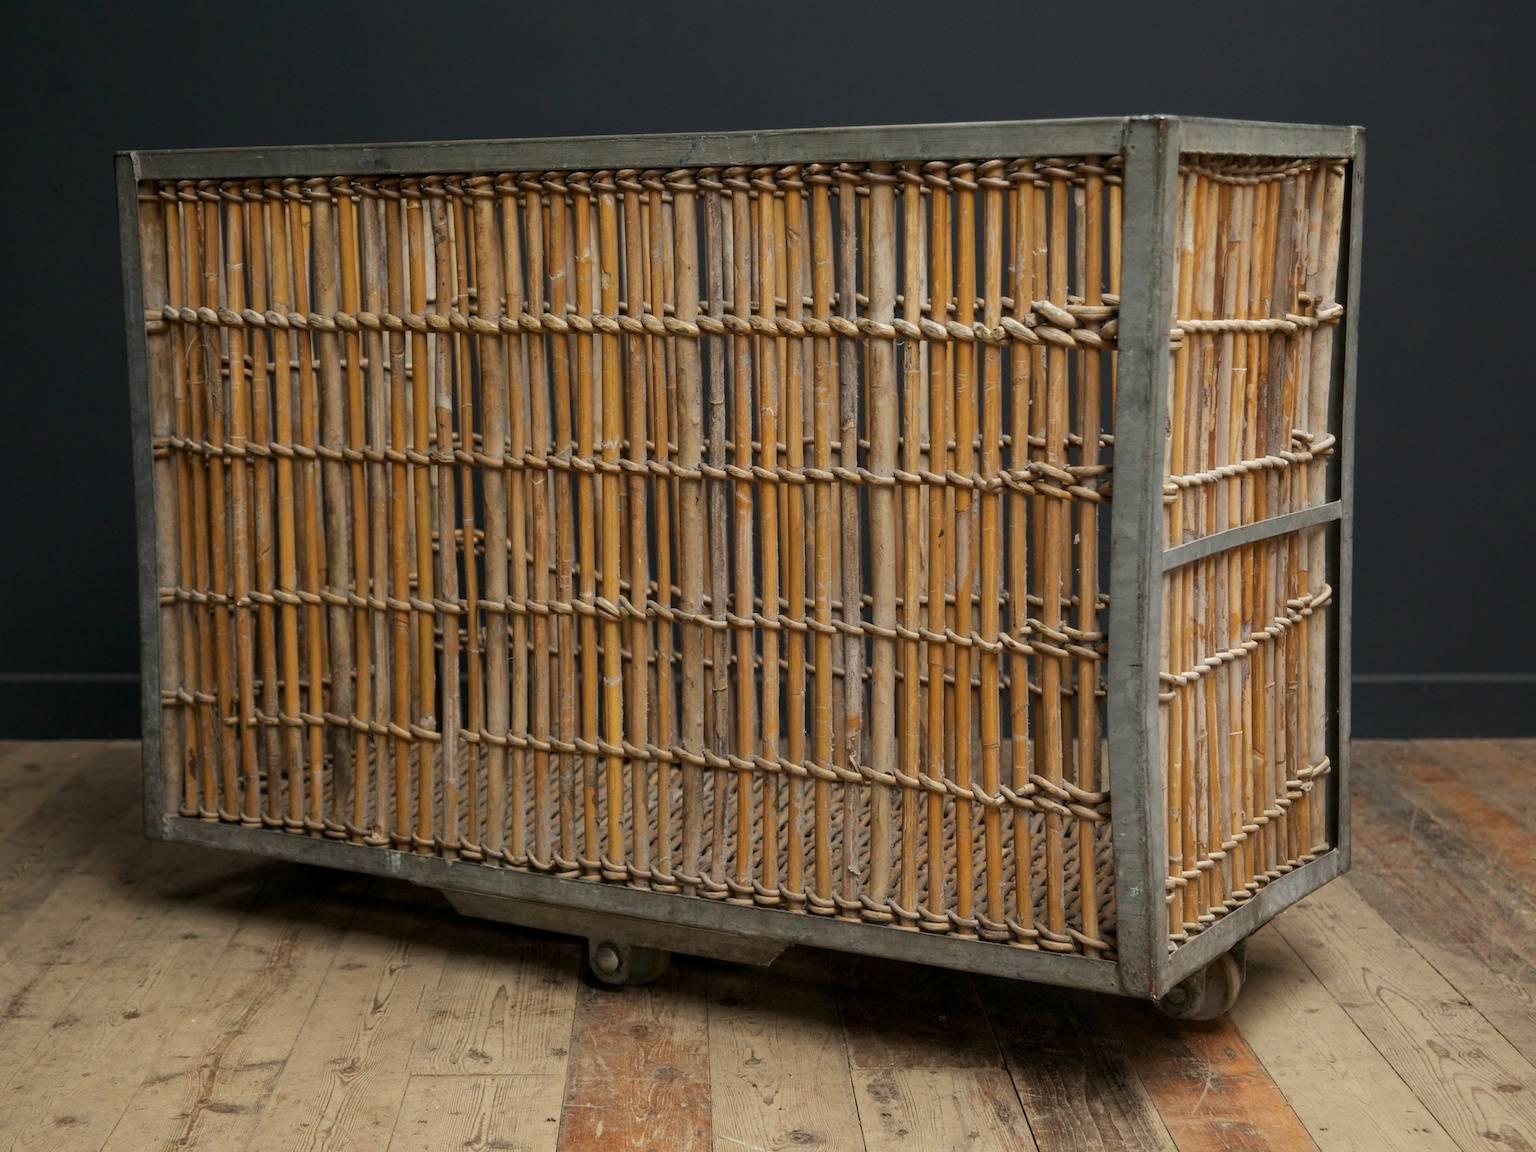 Factory mill trolley.

Galvanised steel frame with inset bamboo panels raised on off set castors,

English, mid-20th century.